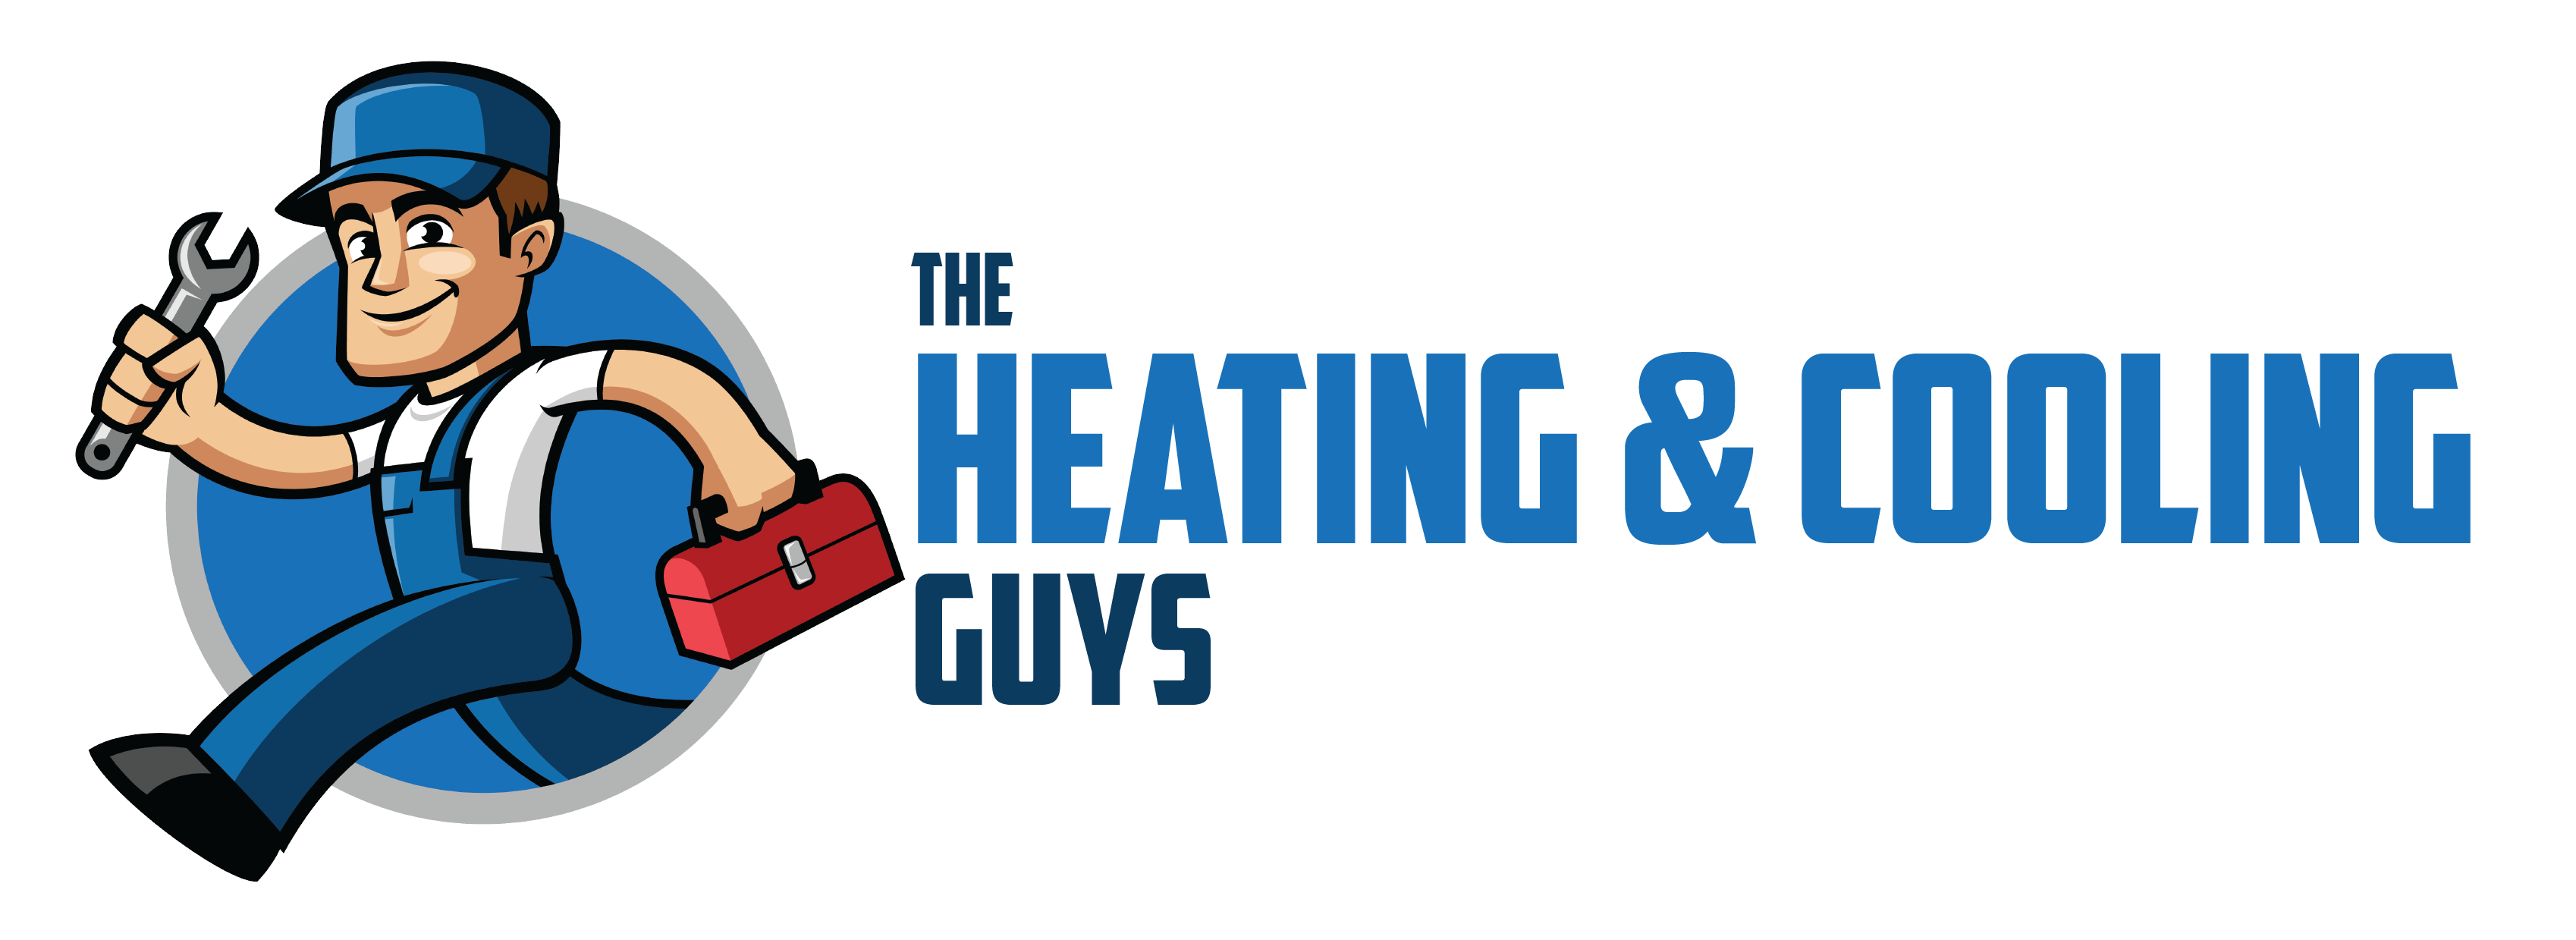 The Heating & Cooling Guys